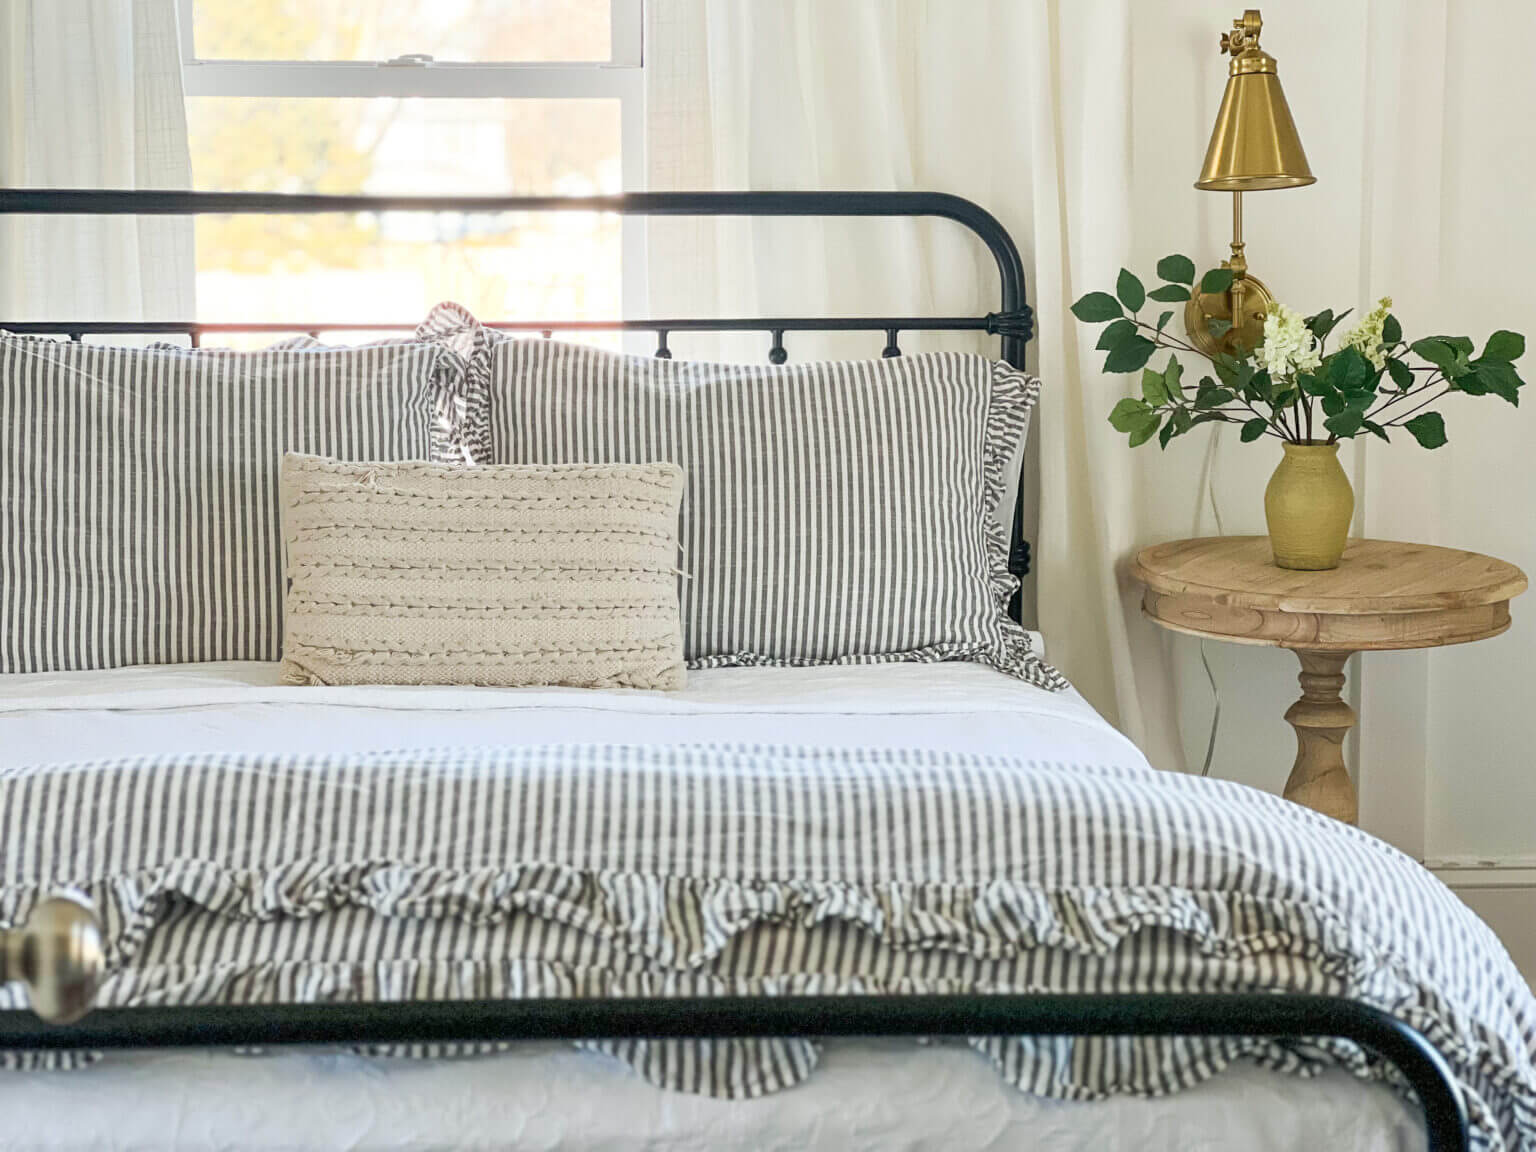 Blue and white striped bedding and black iron headboard.